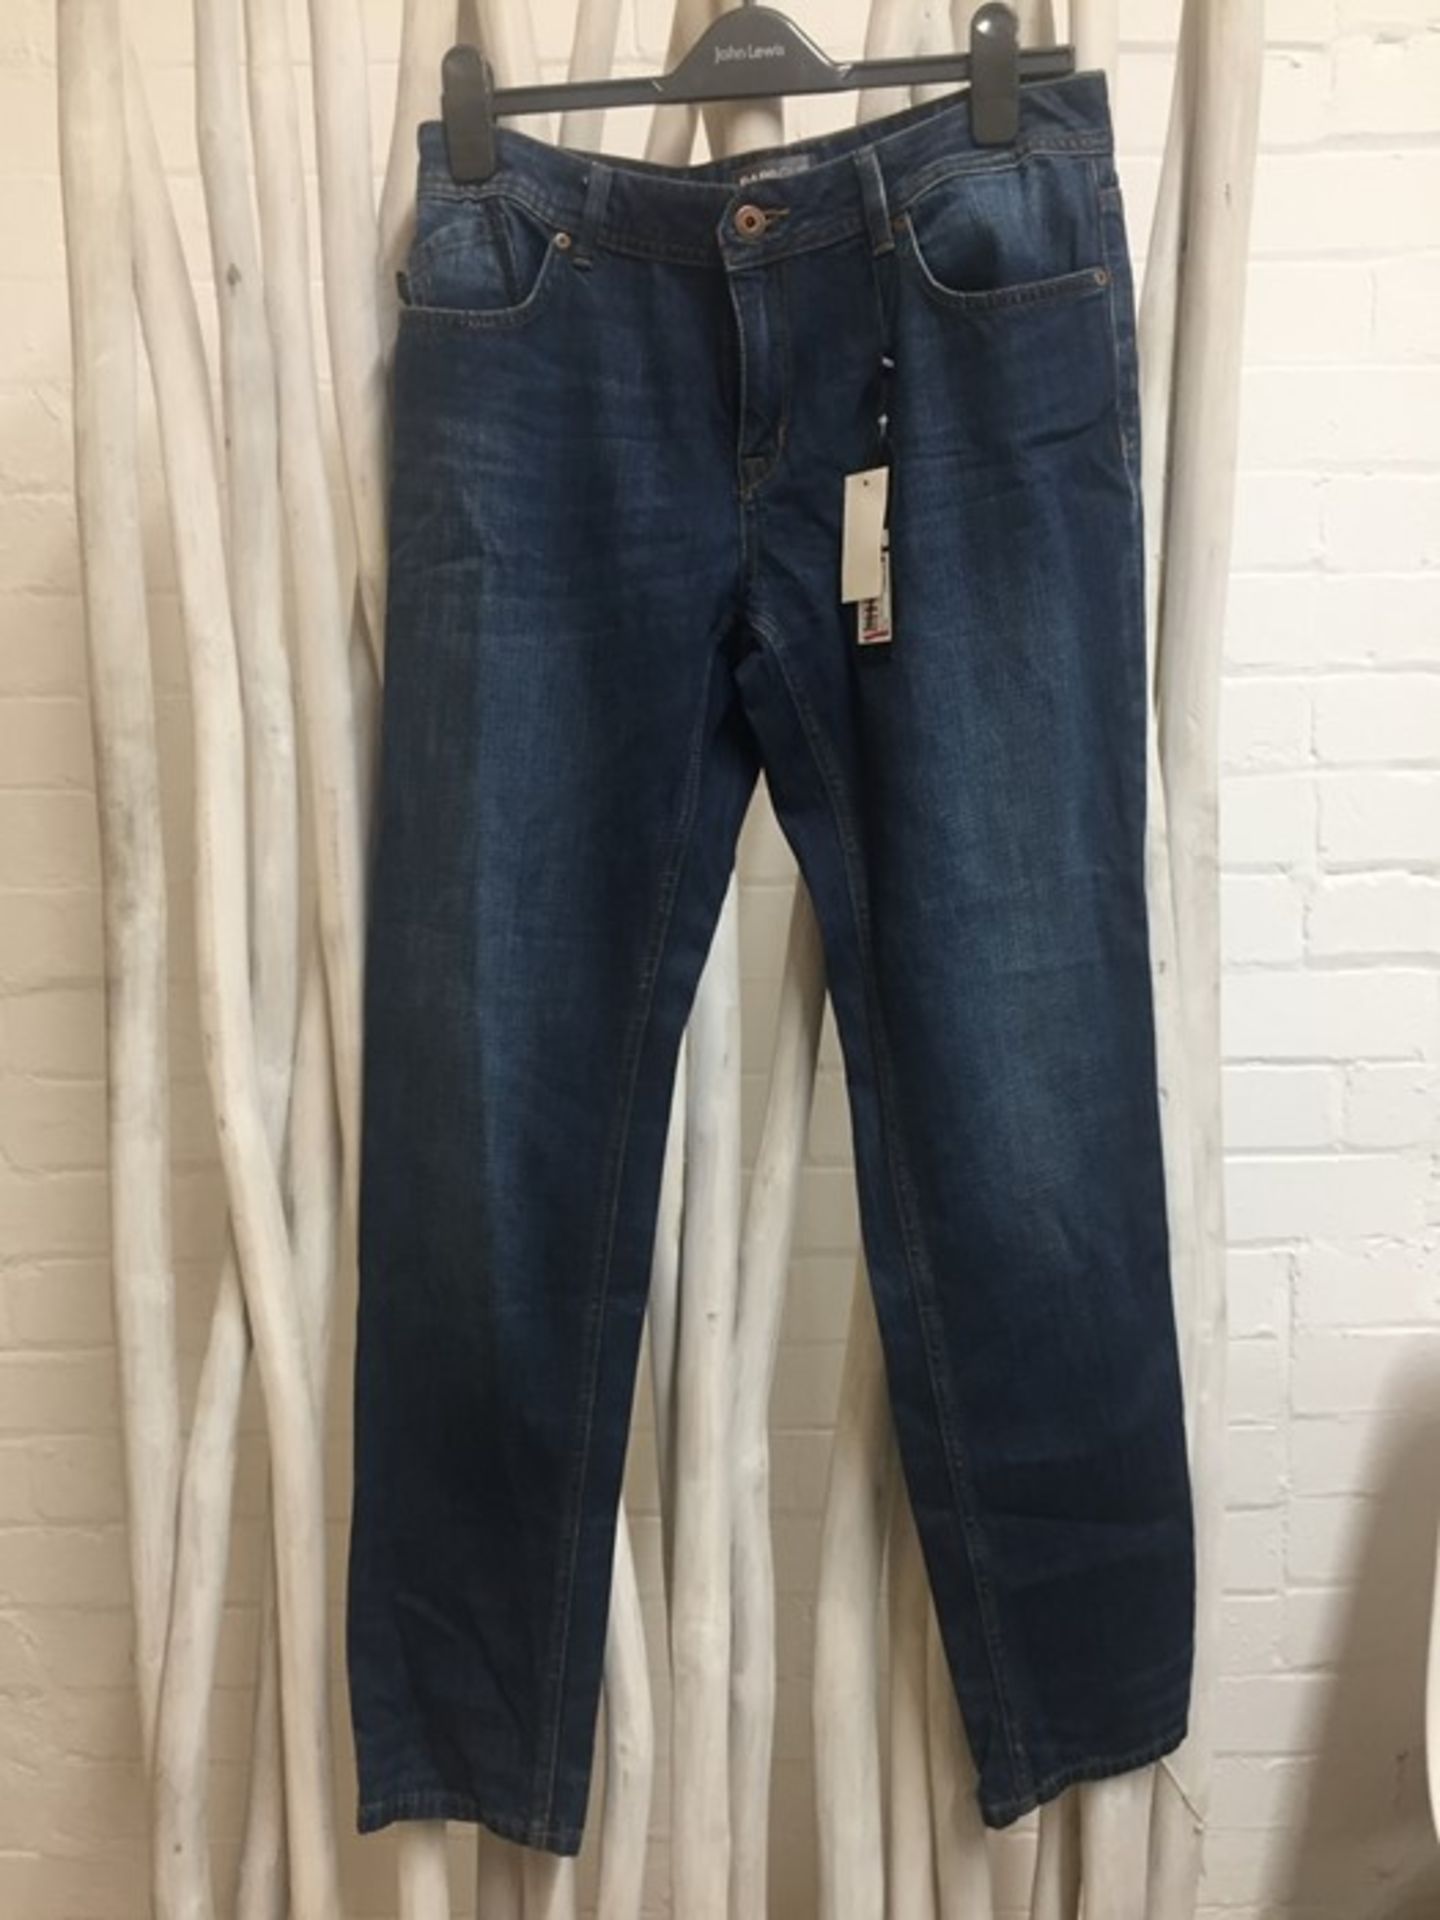 1 BARBOUR INTERNATIONAL CROSSOVER TOMBOY DENIM JEANS IN W32 L29 / RRP £109.00 (PUBLIC VIEWING